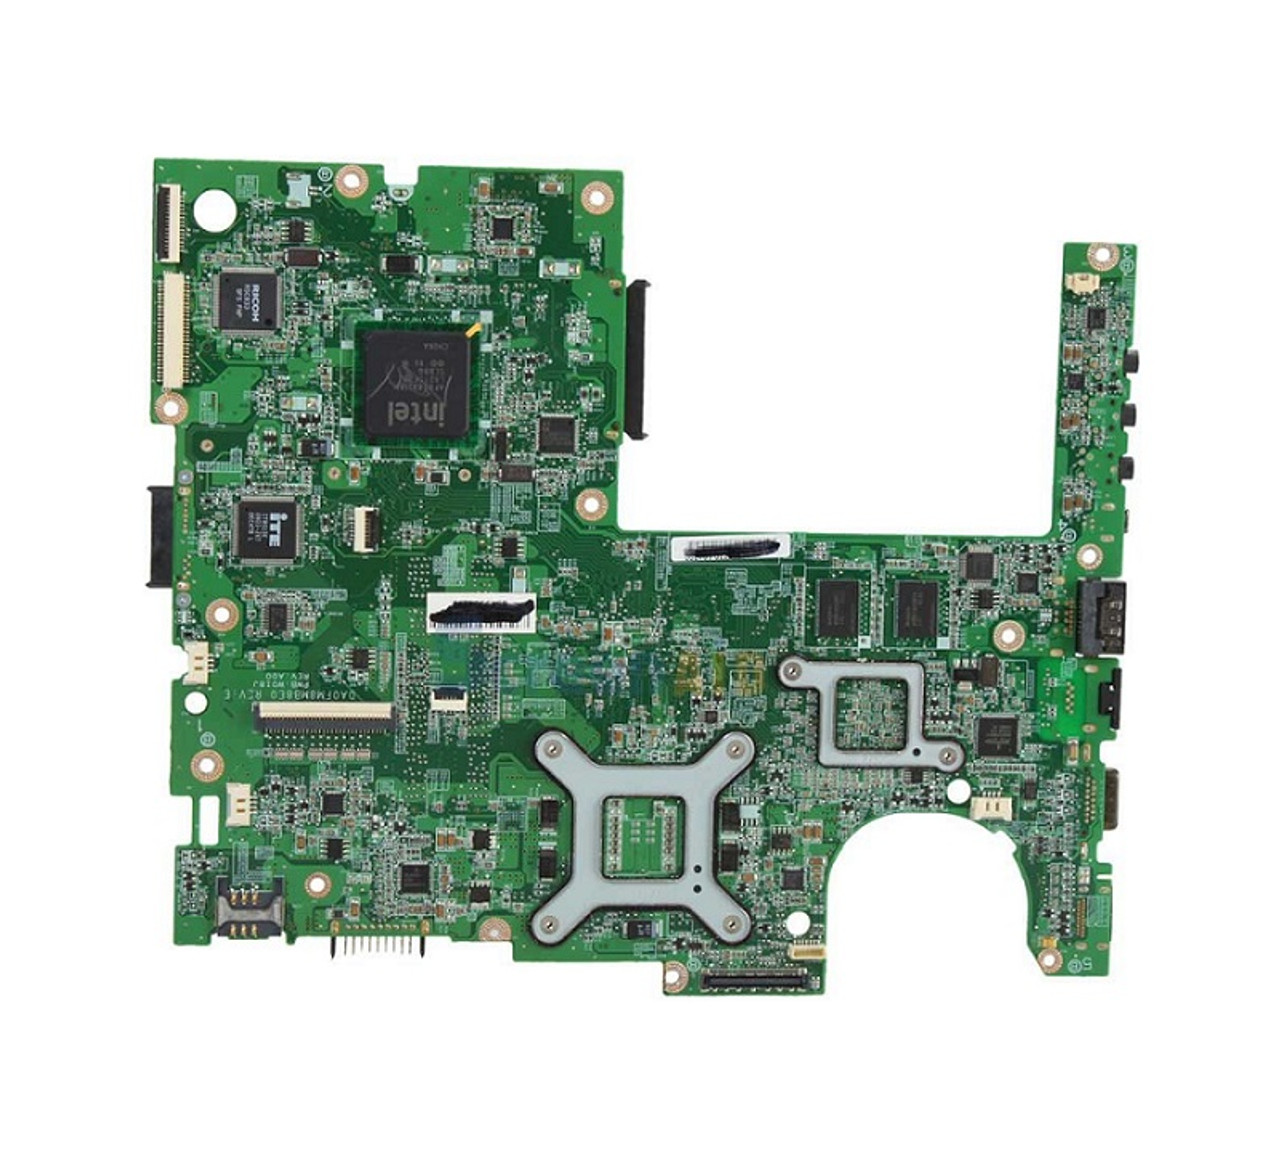 D4572 - Dell System Board for Latitude D610 Laptop